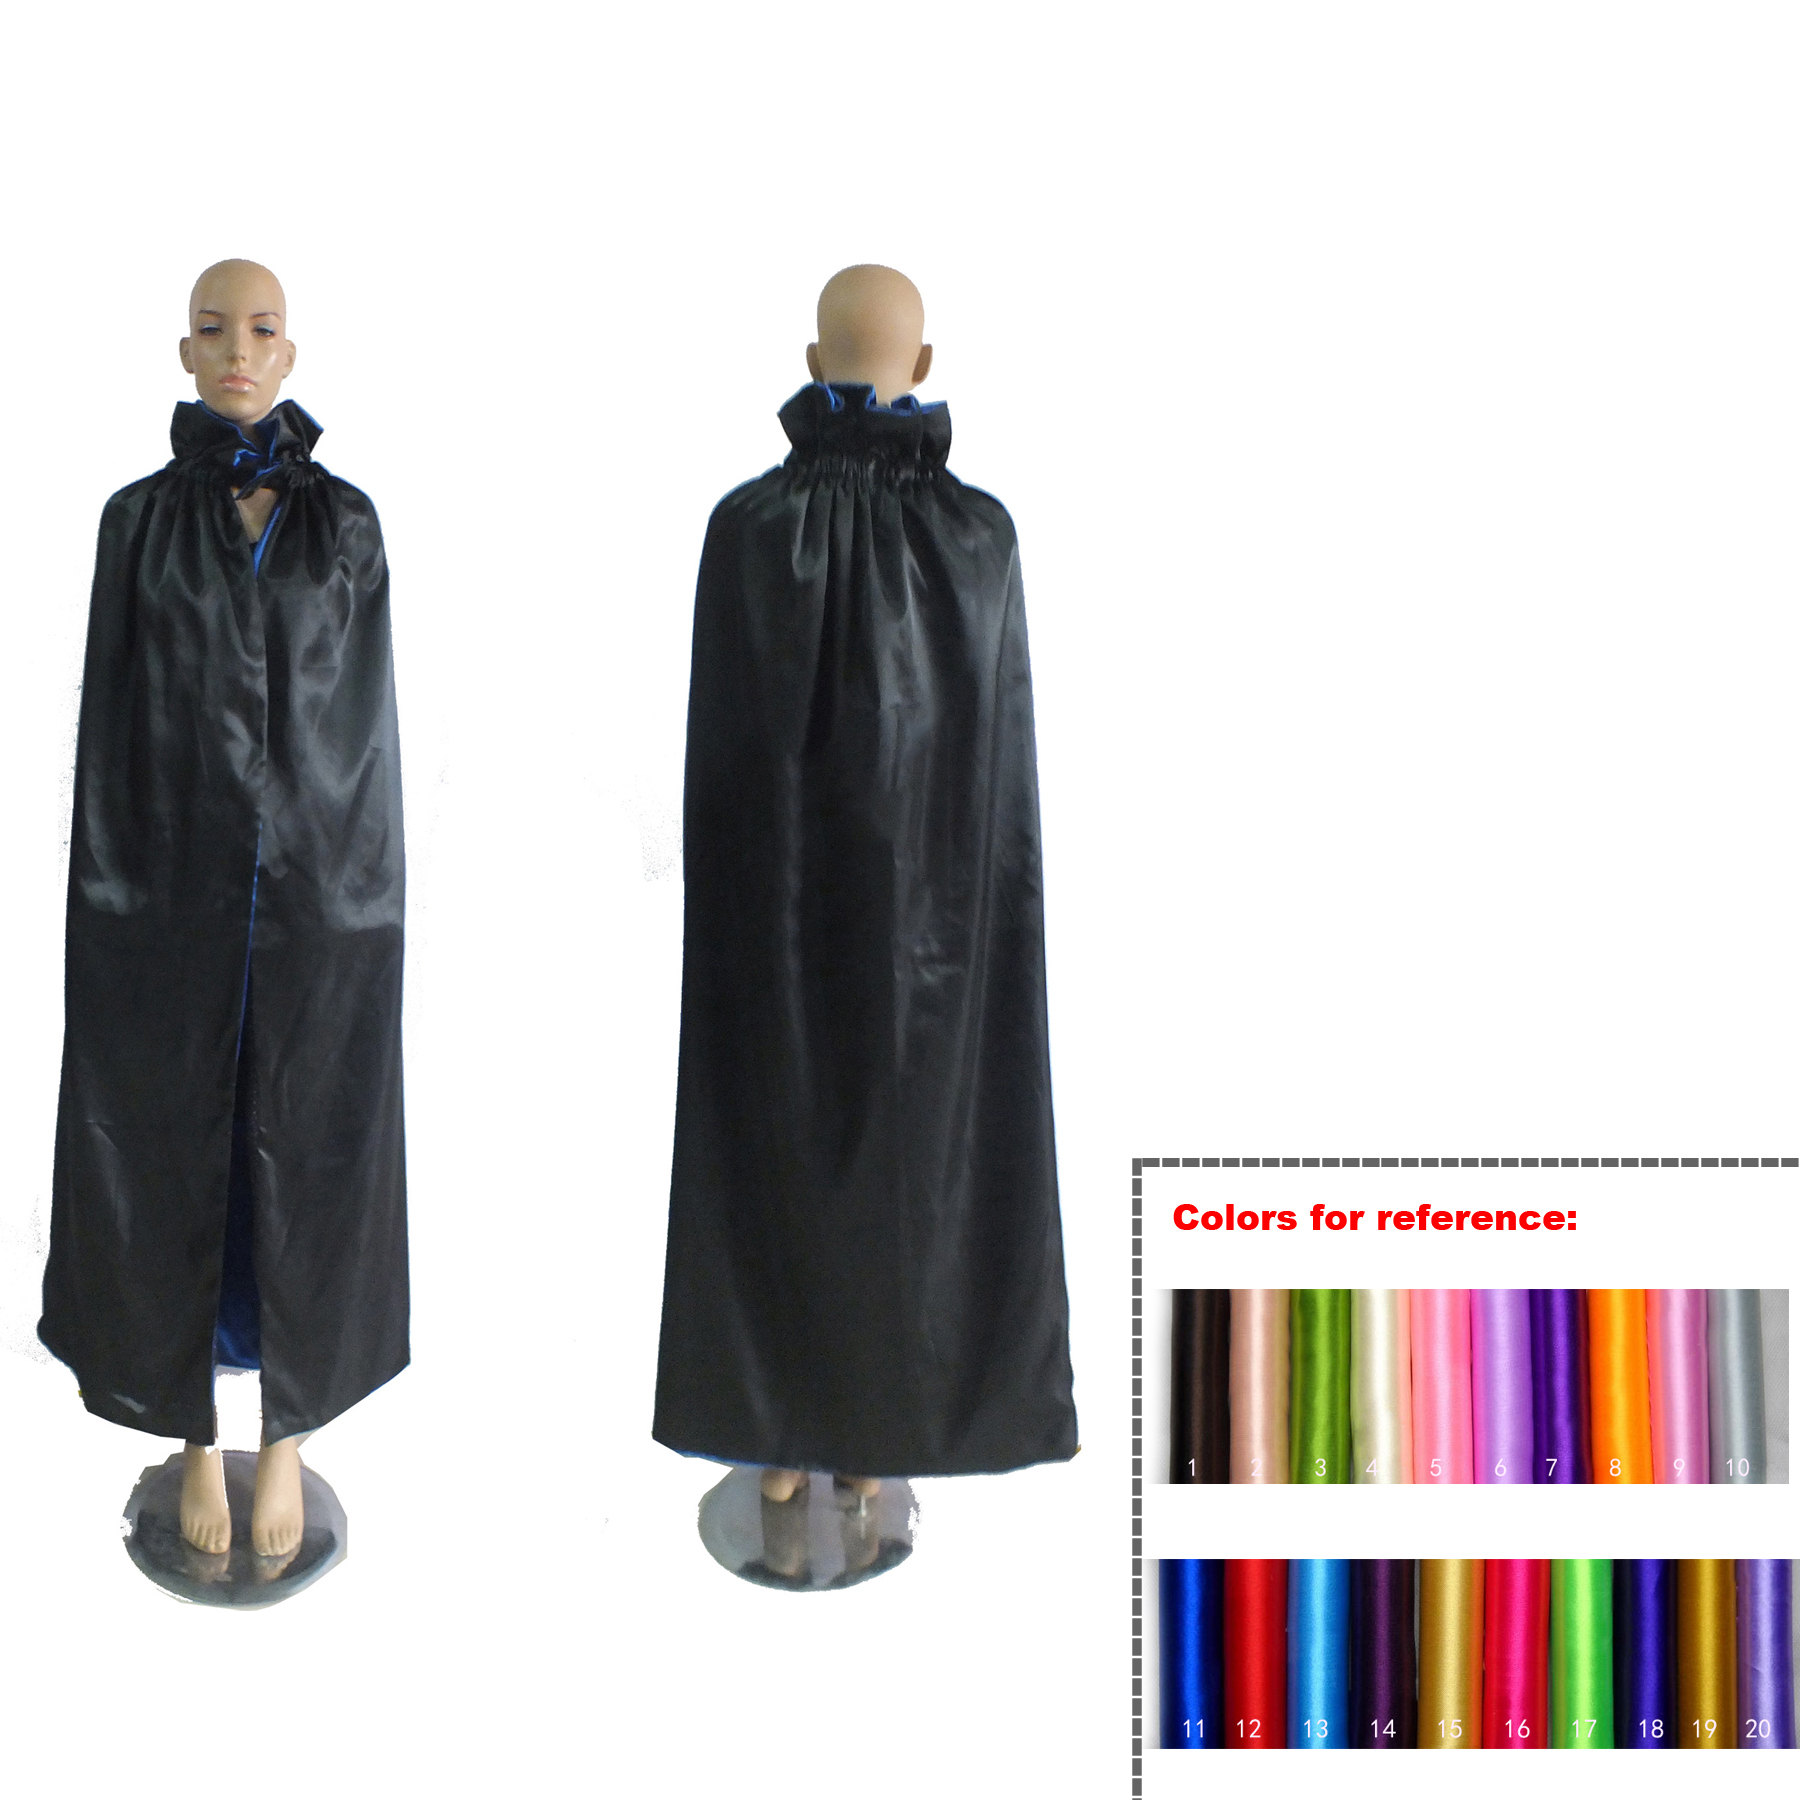 Double layer Adult Cape with Velcro closure